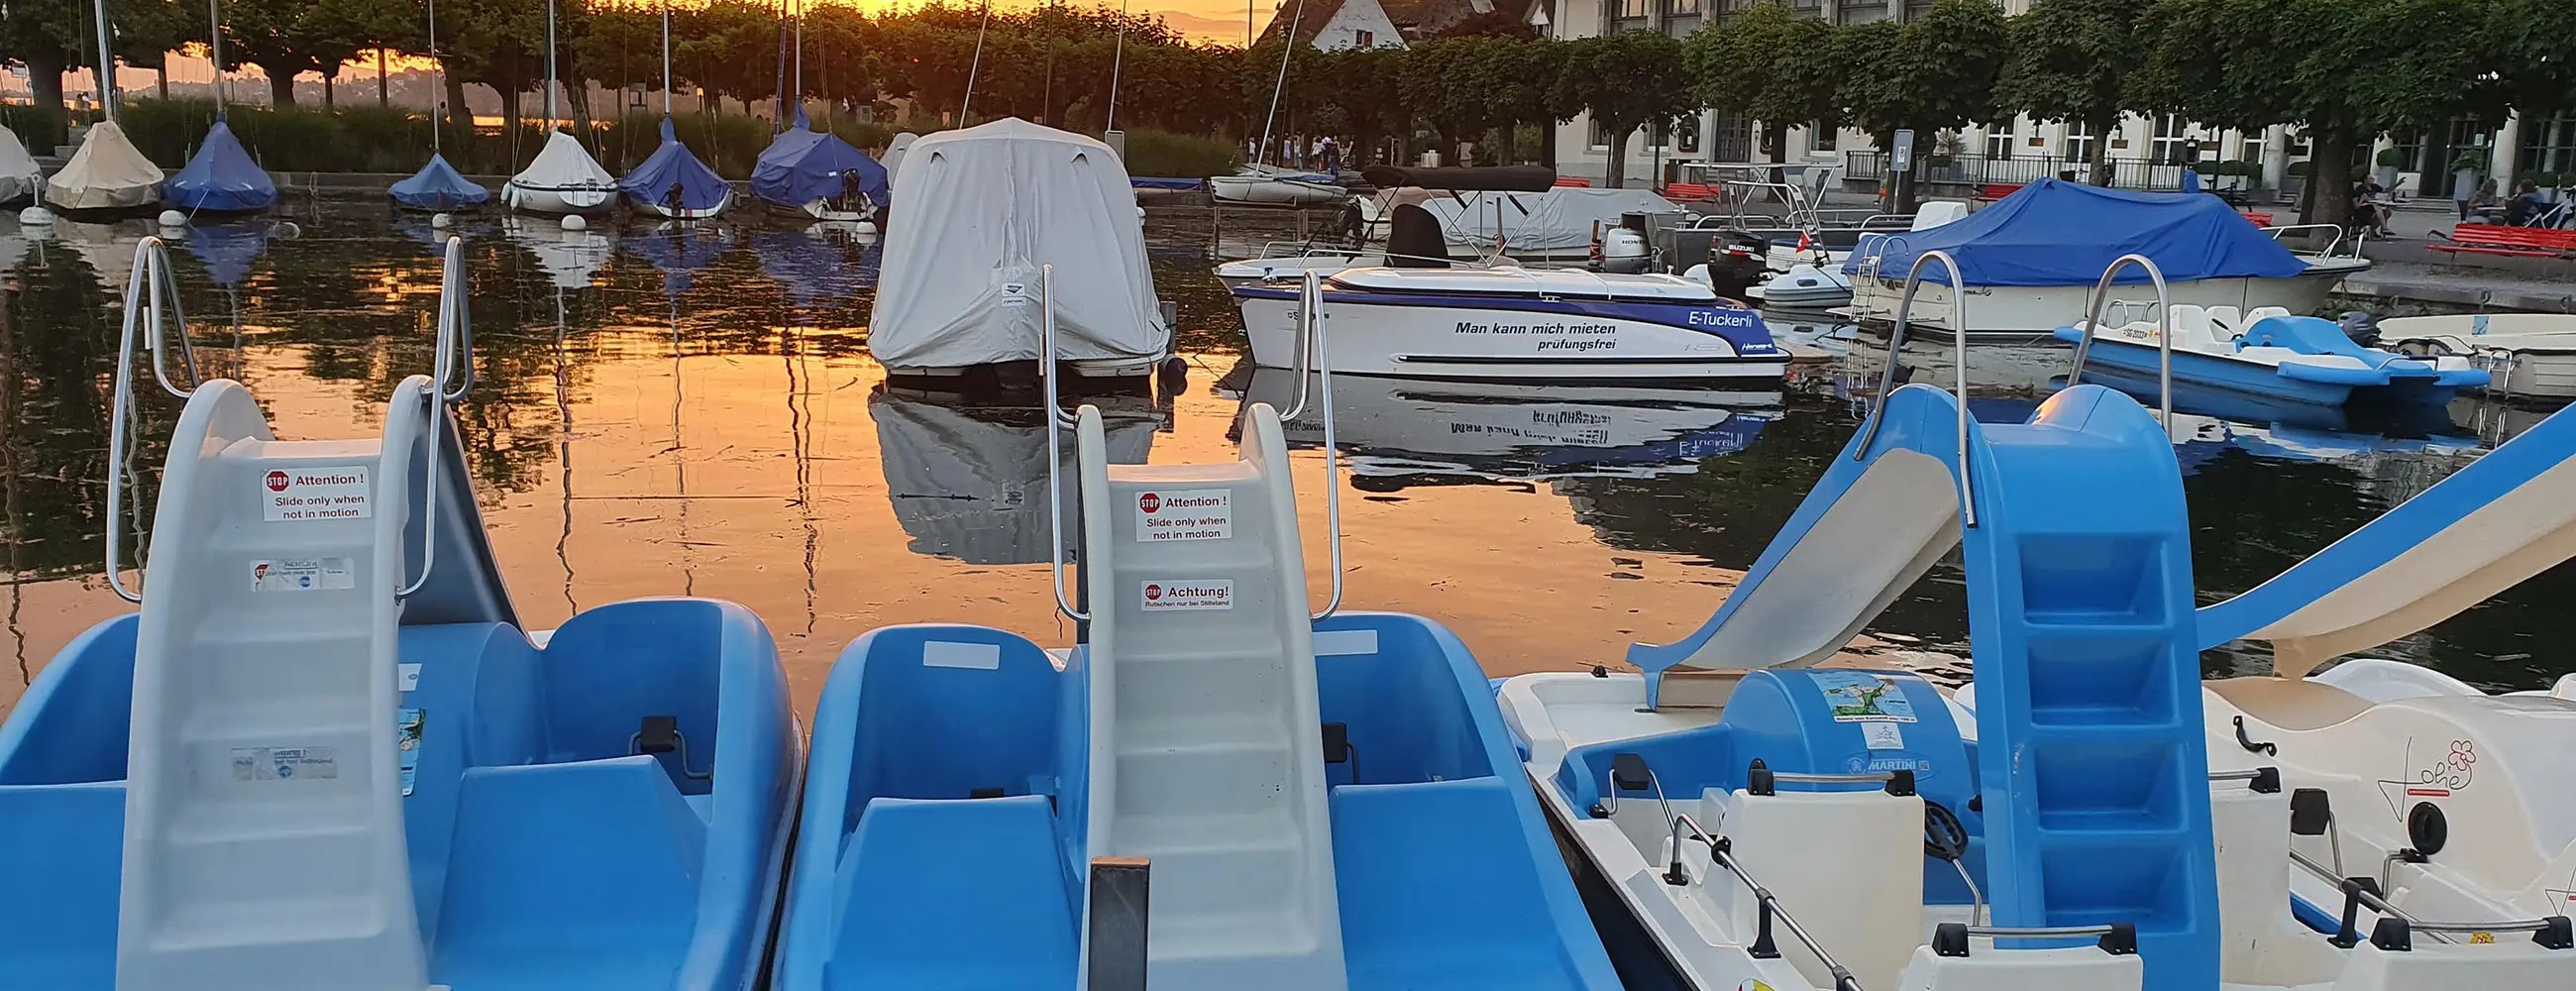 pedalo-hensa-werft-rapperswil-02